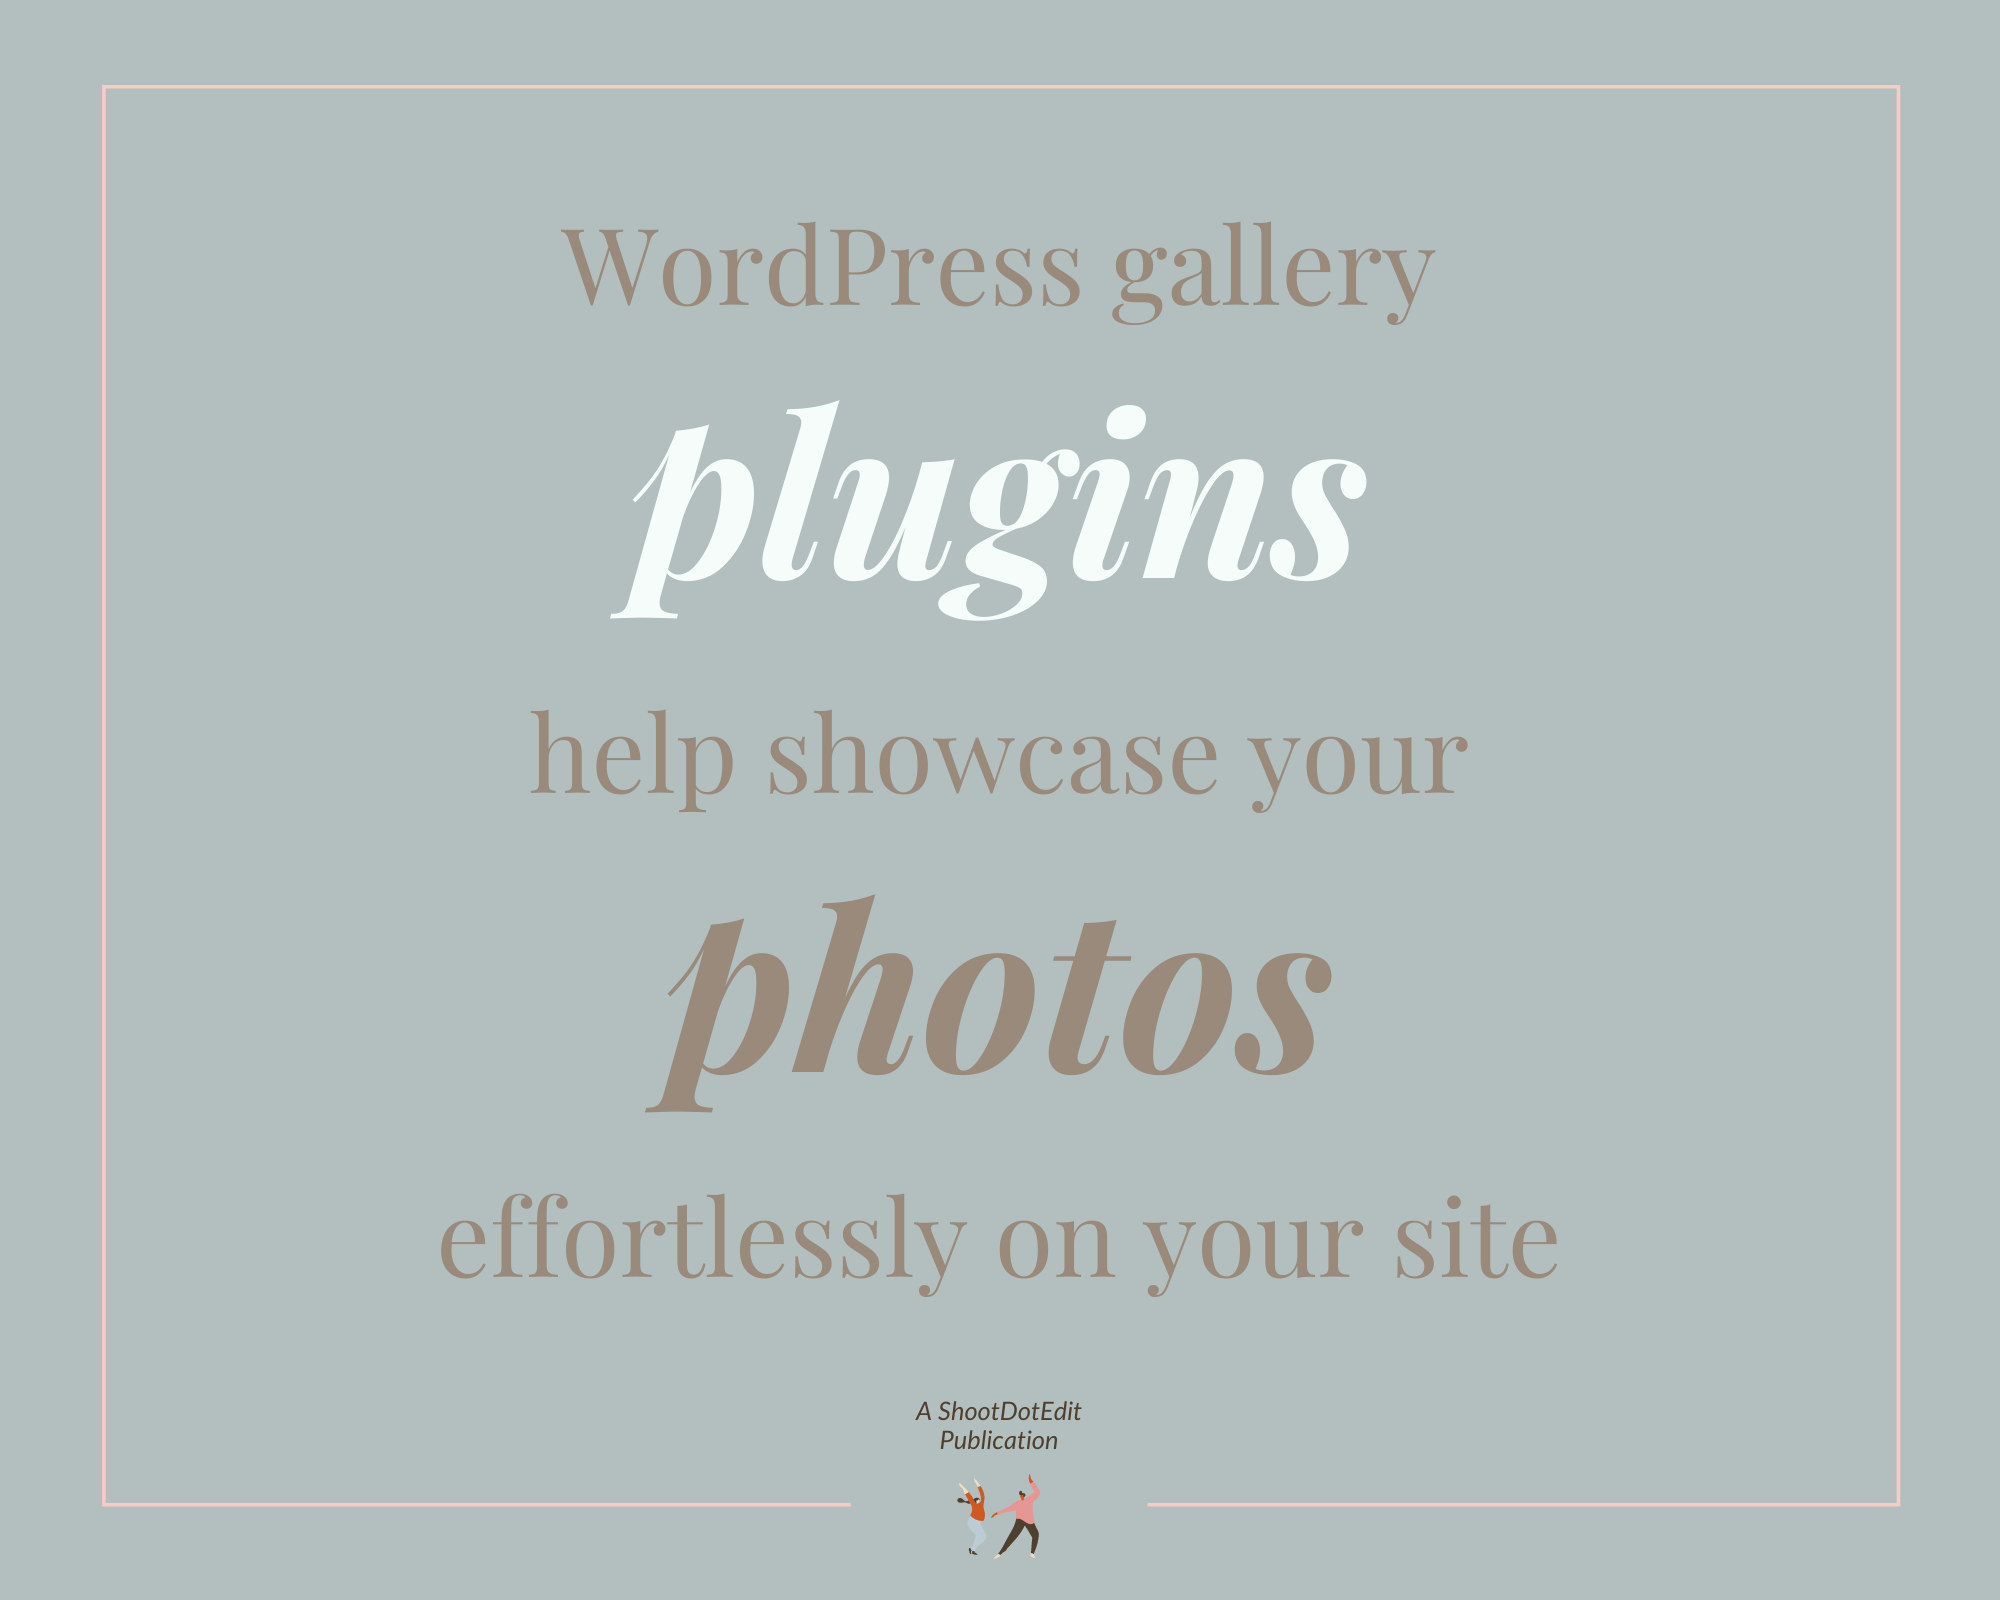 WordPress gallery plugins helps showcase your photos effortlessly on your site